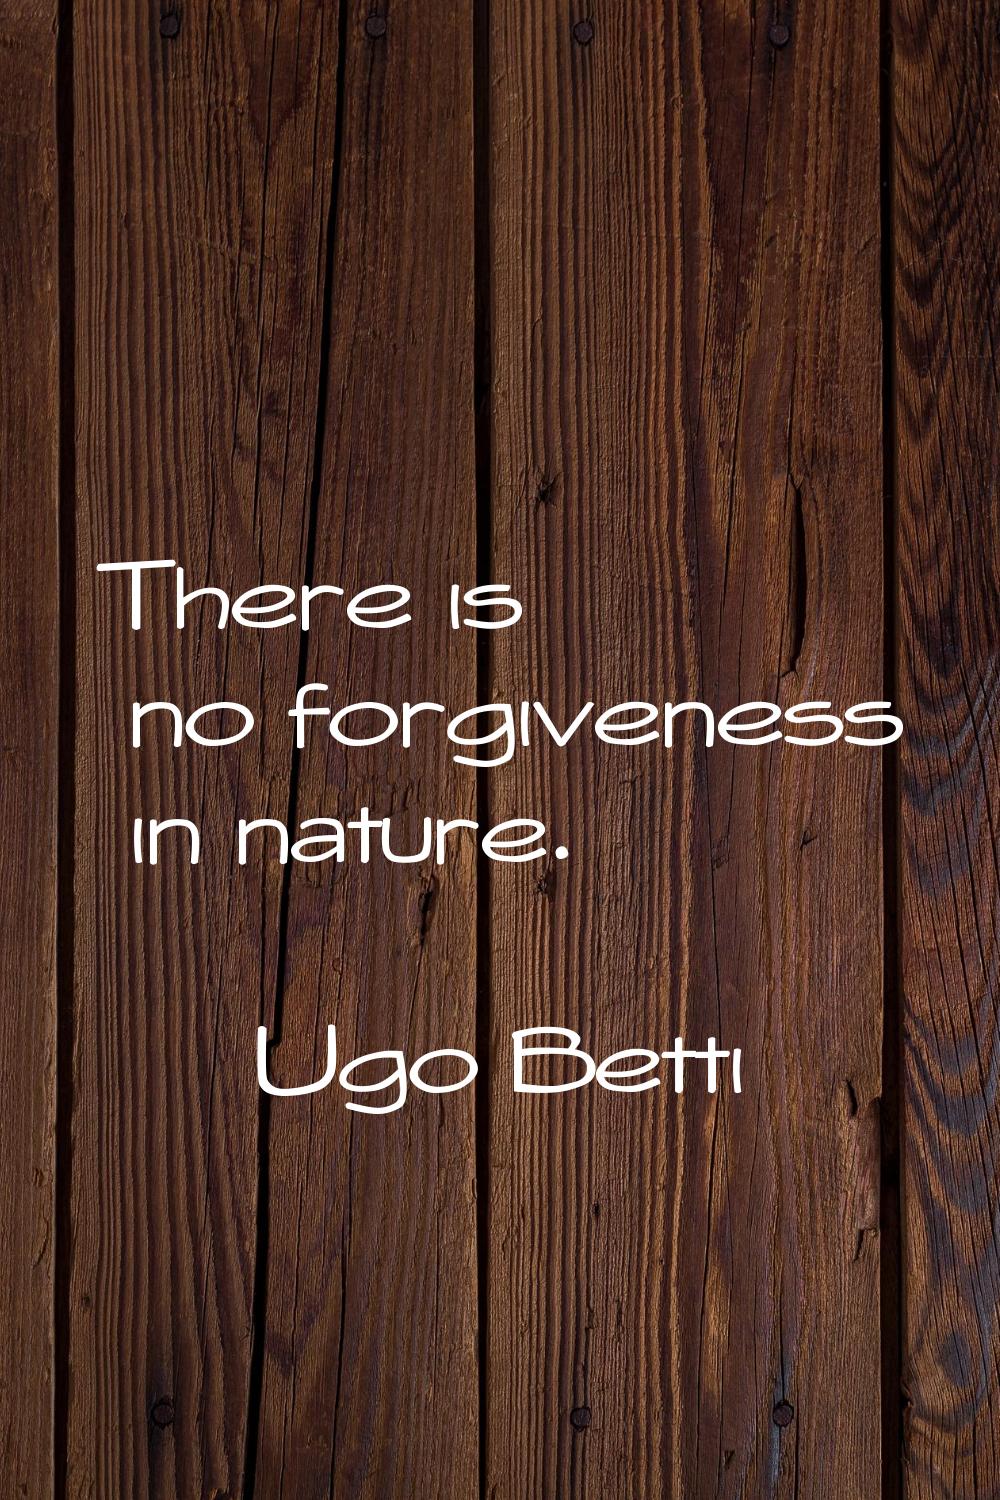 There is no forgiveness in nature.